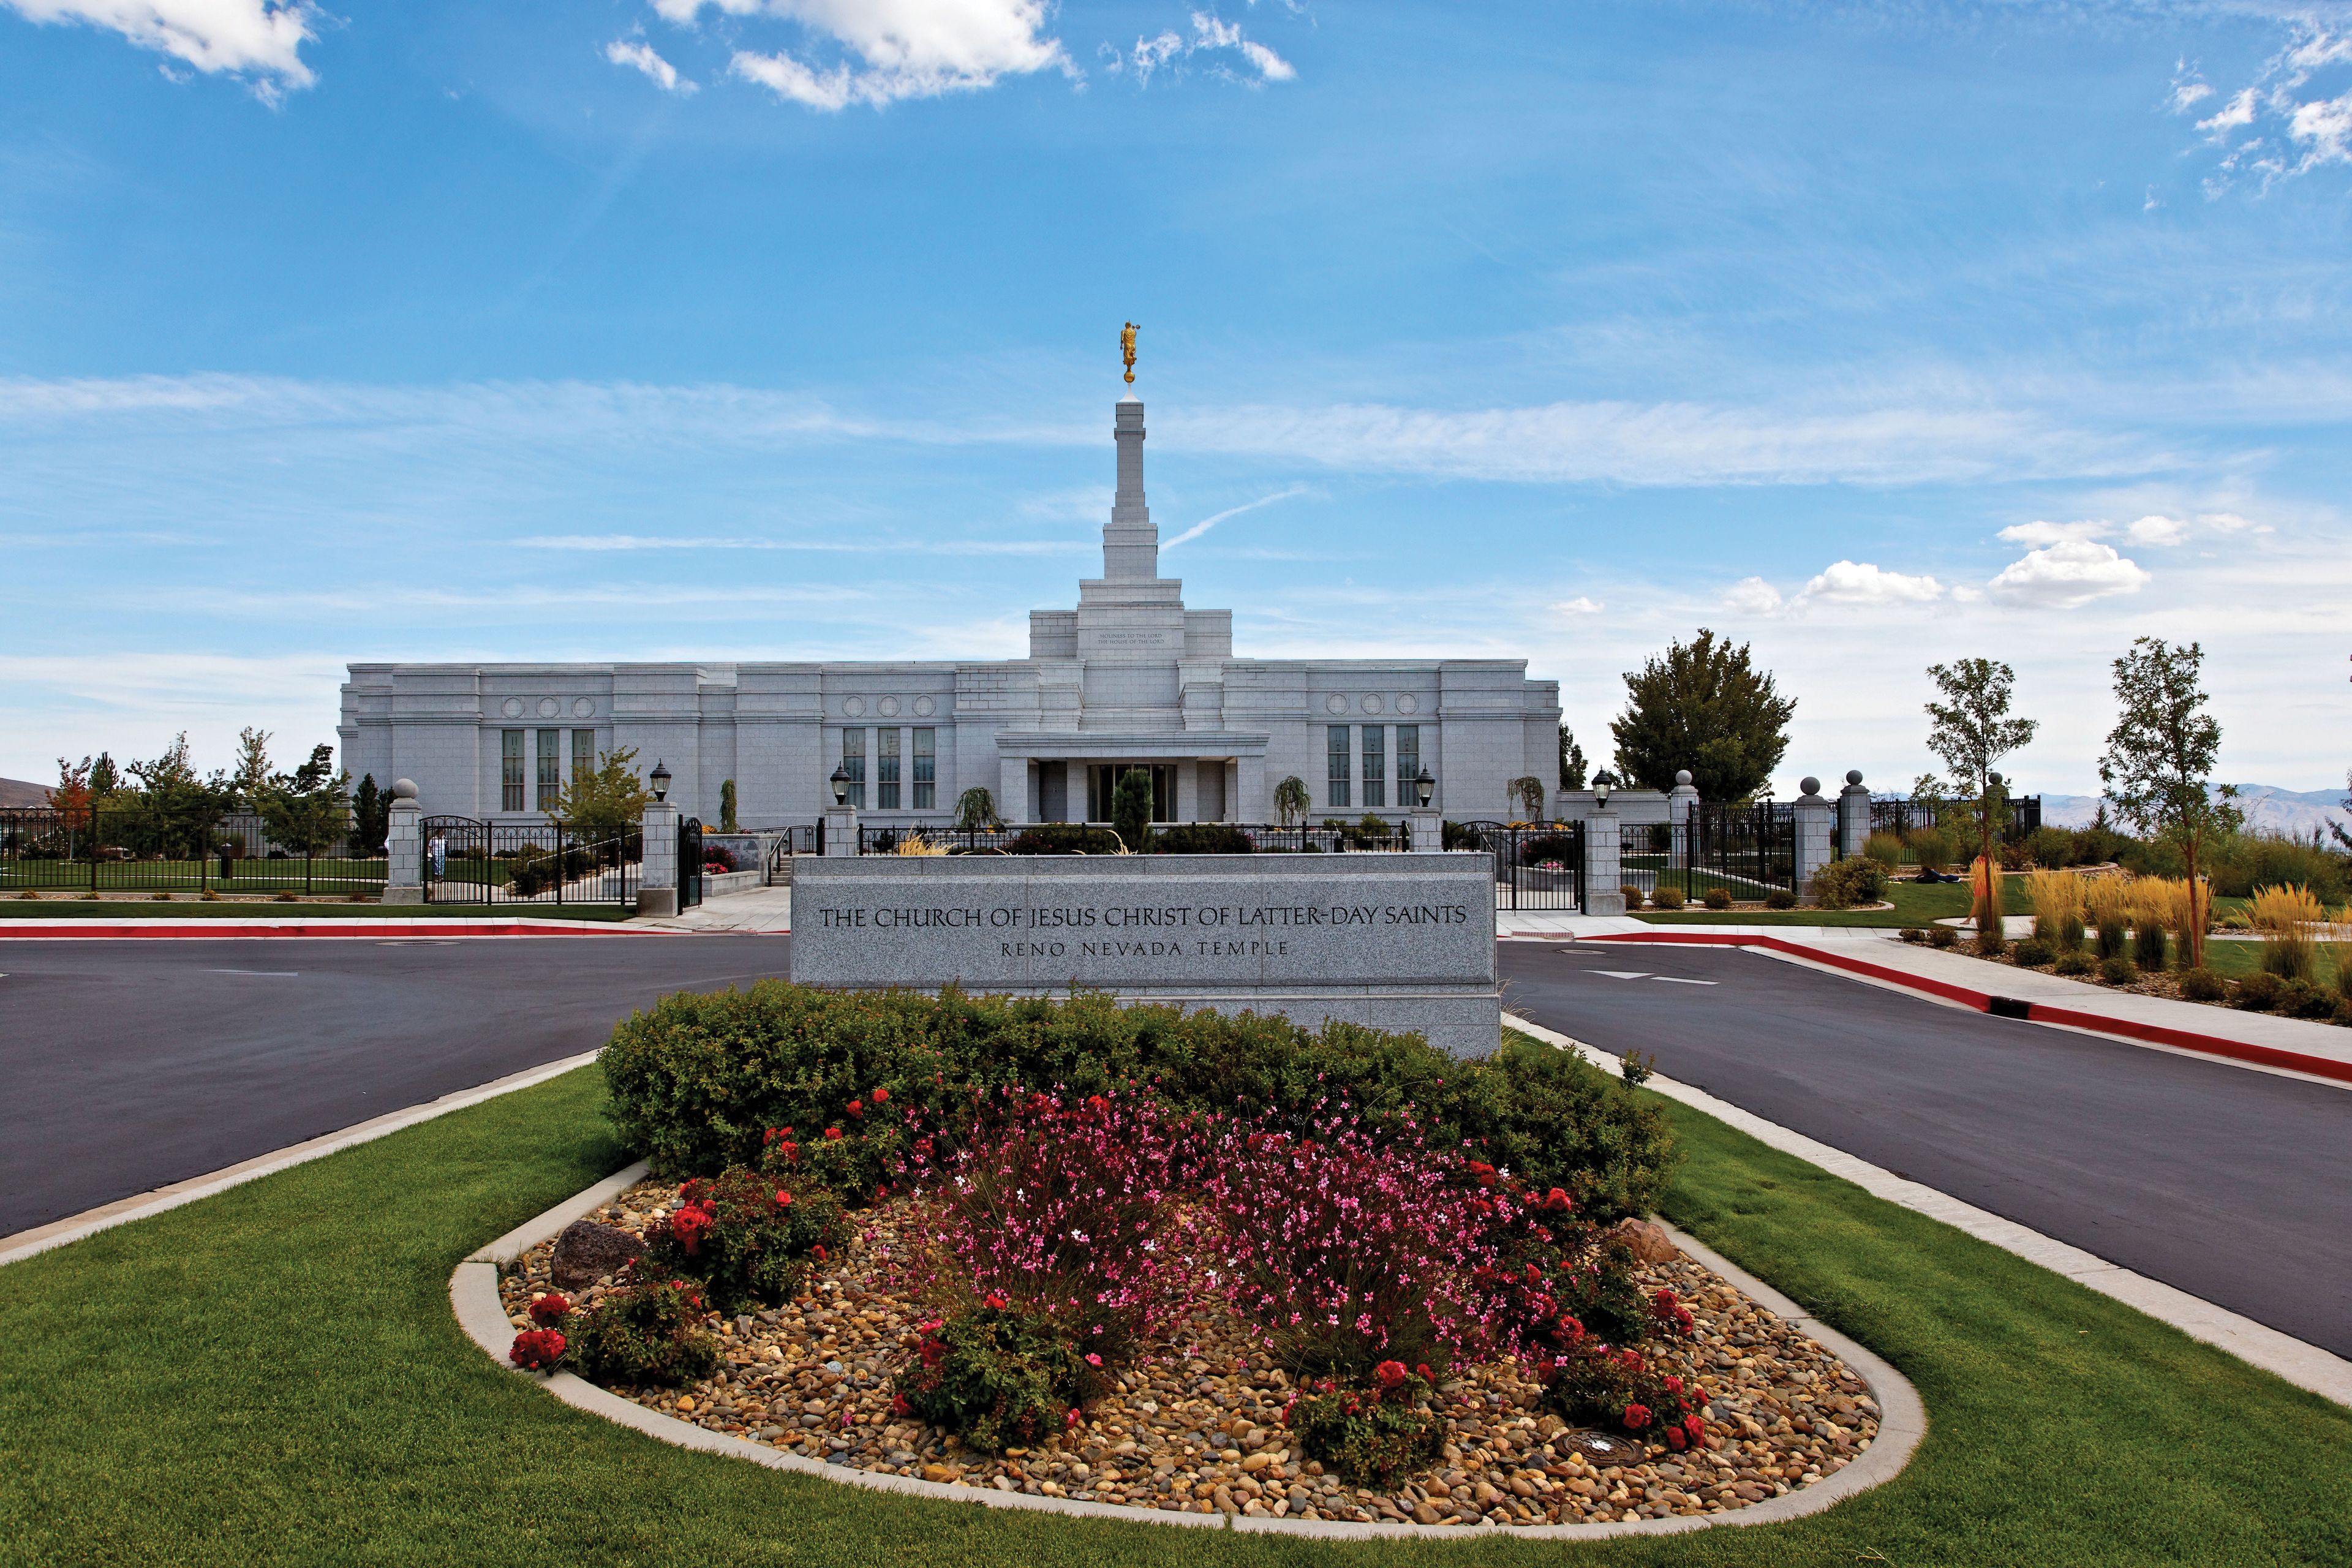 The entire Reno Nevada Temple, including the name sign and scenery.